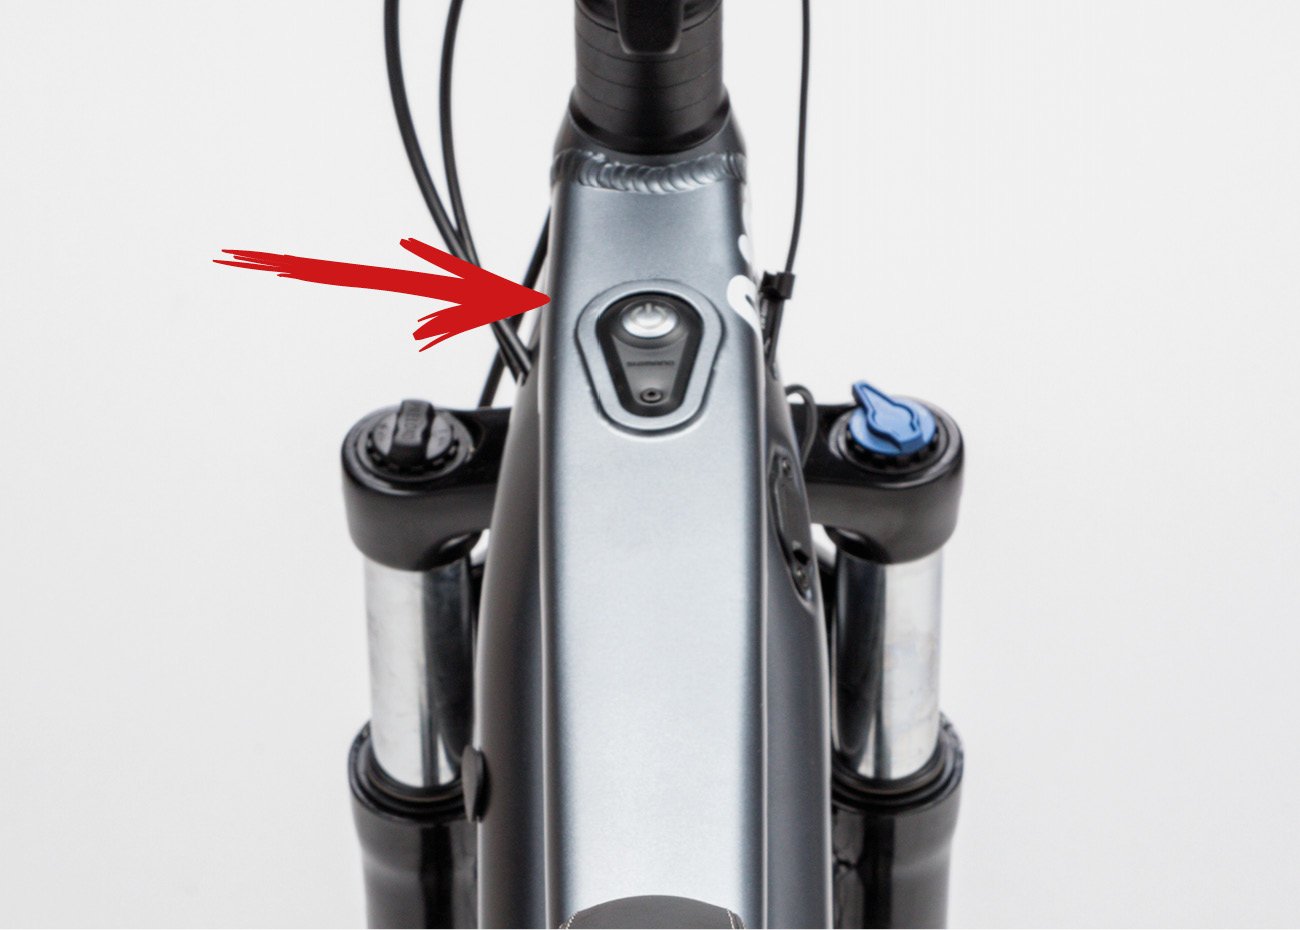 Power button location for electric bike